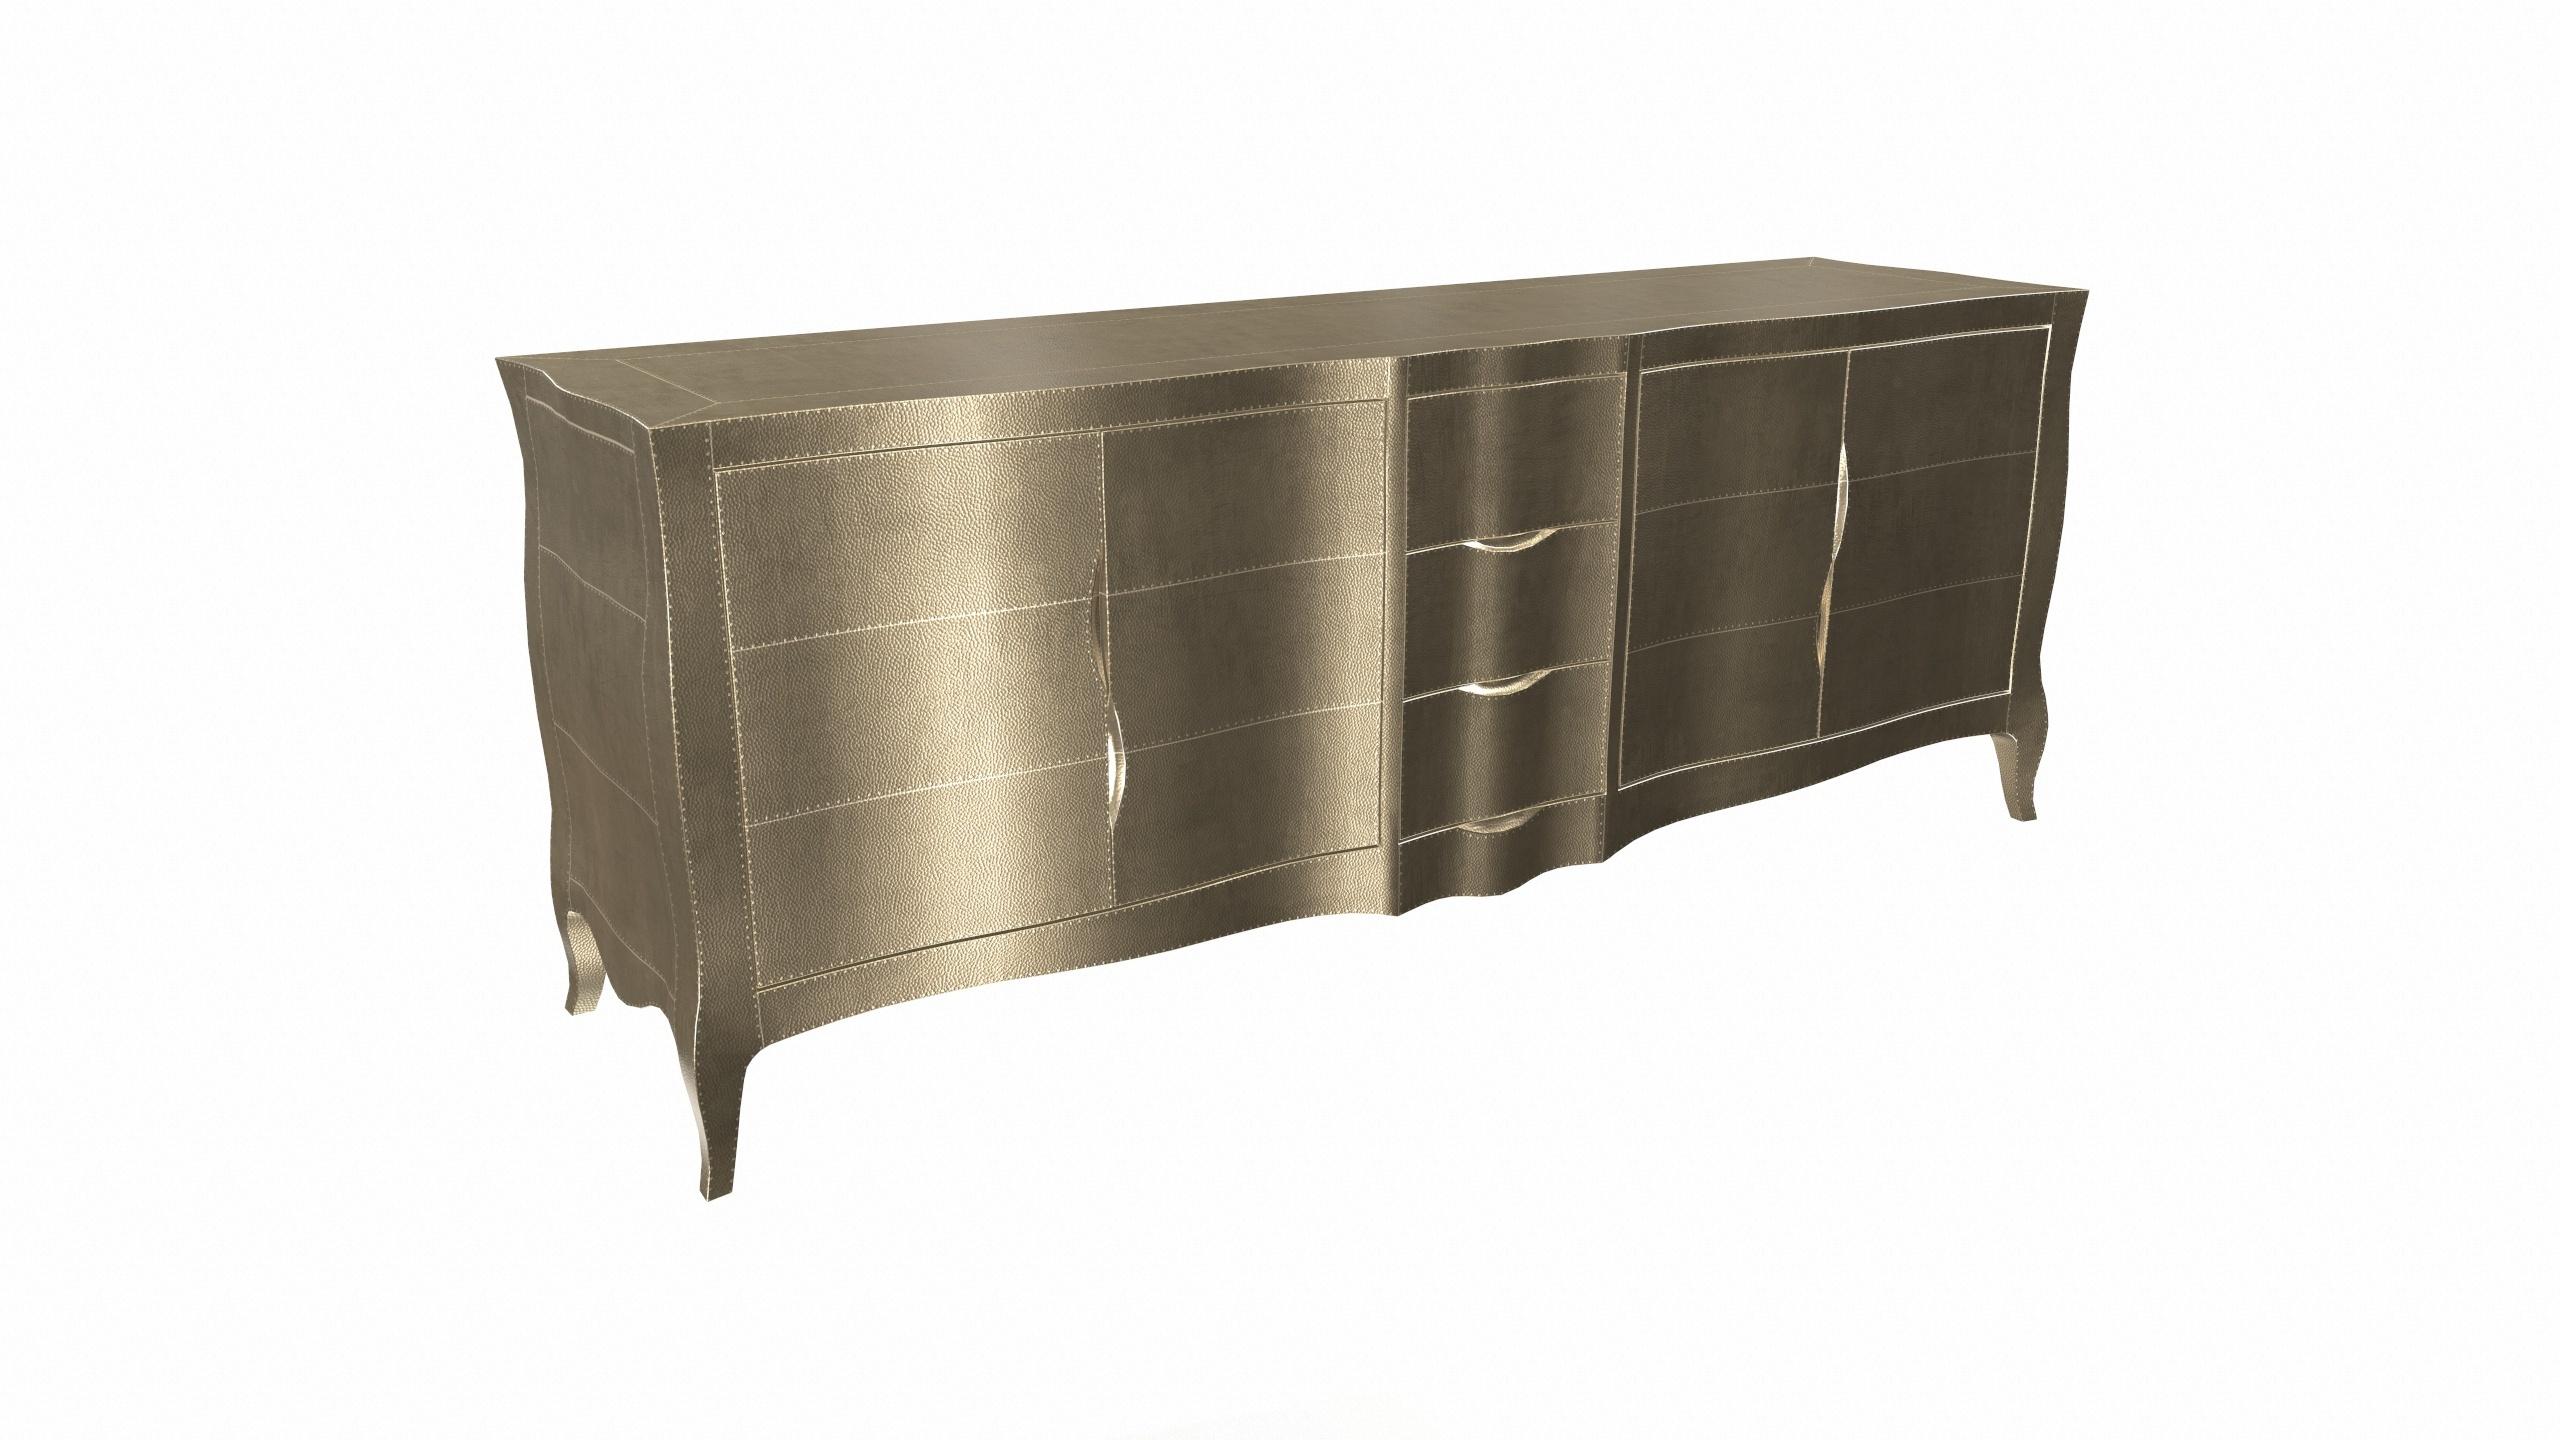 Contemporary Louise Credenza Art Deco Cabinets in Mid. Hammered Brass by Paul Mathieu For Sale